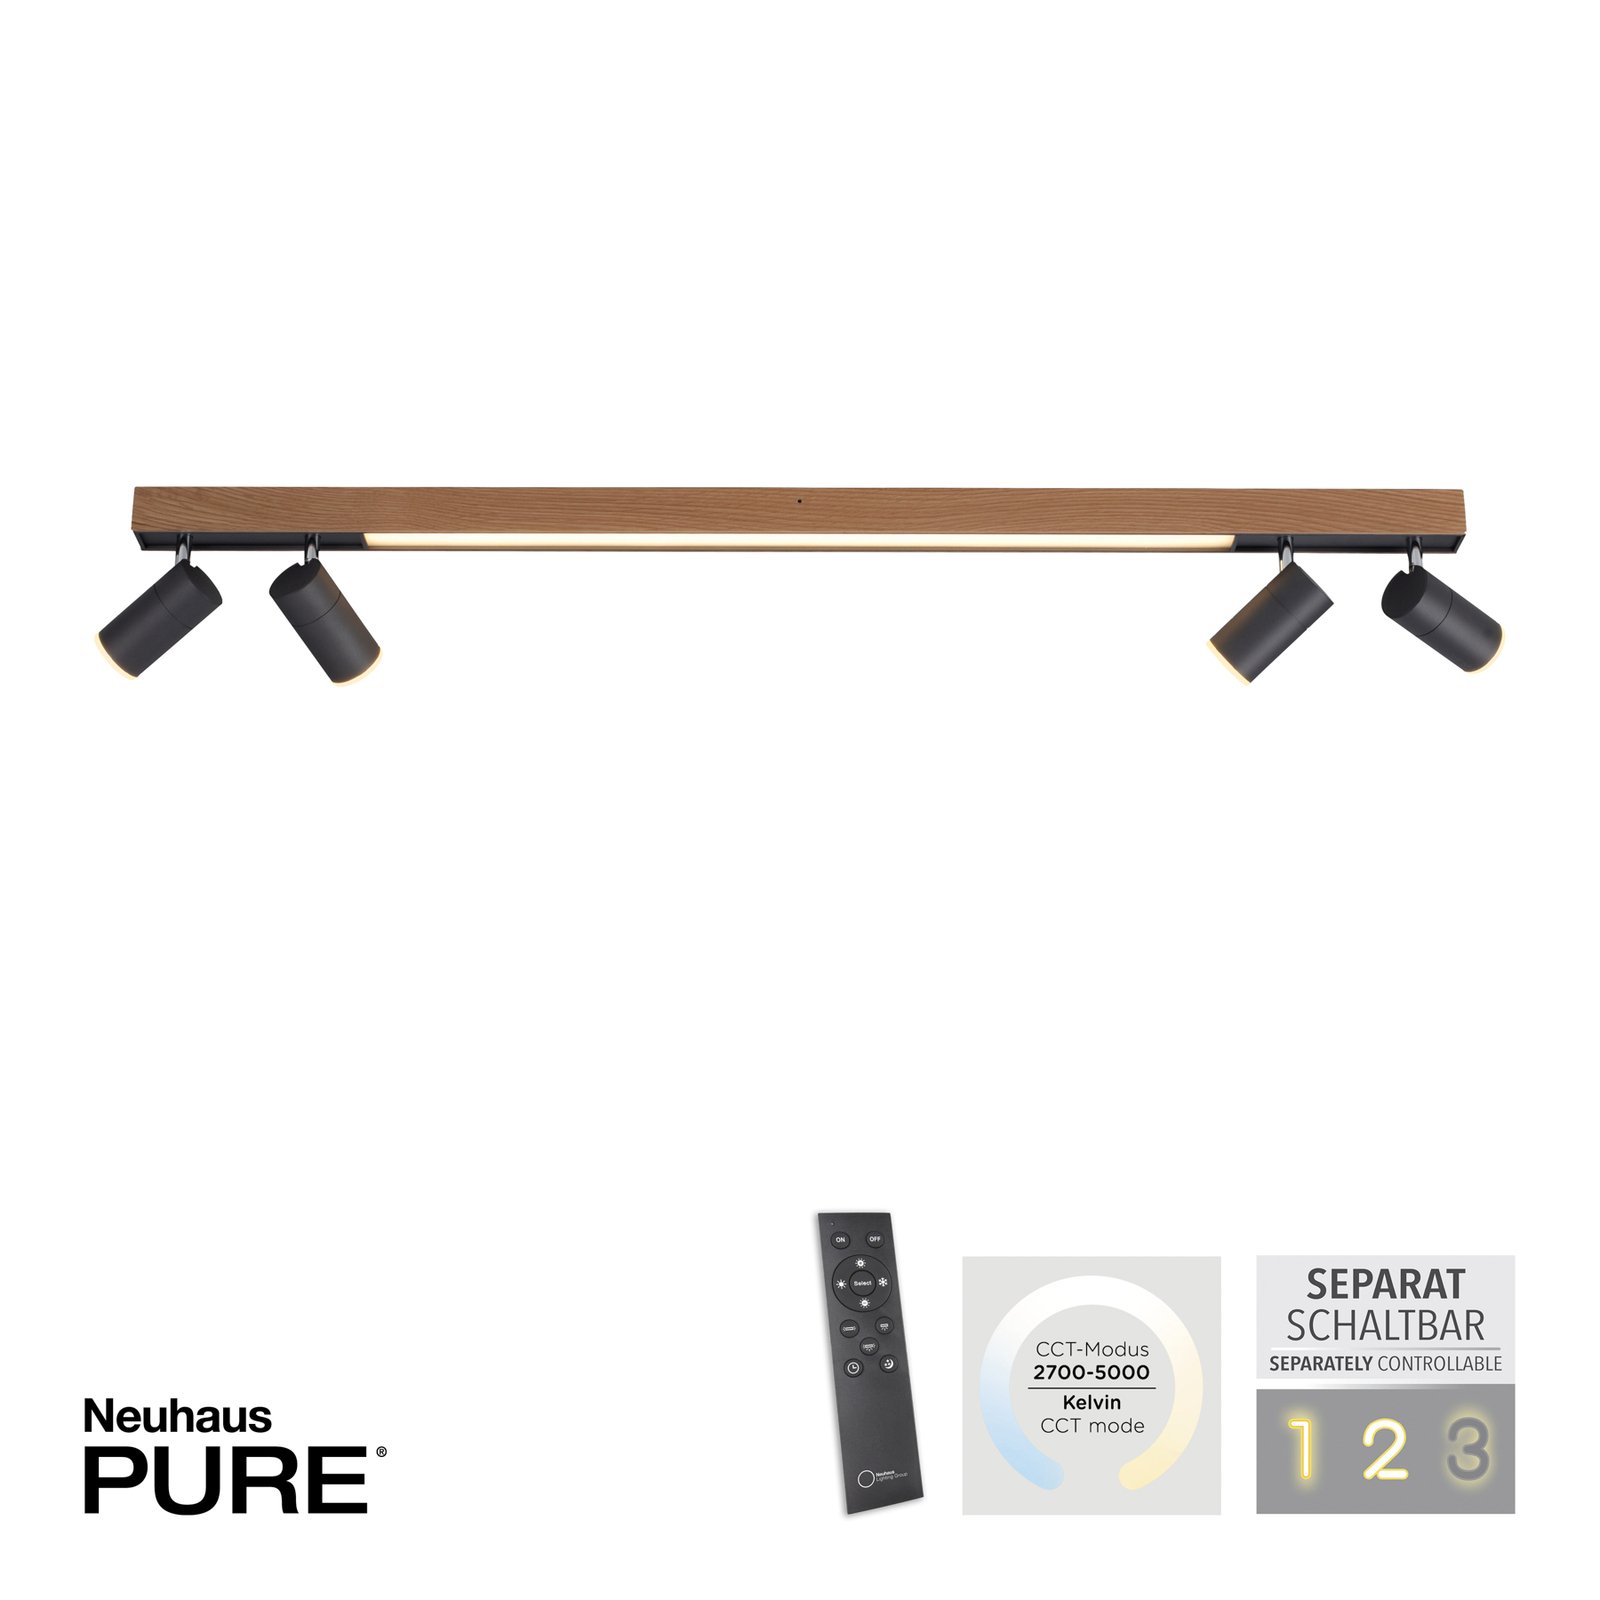 PURE Lines LED-taklampa 4 lampor trä